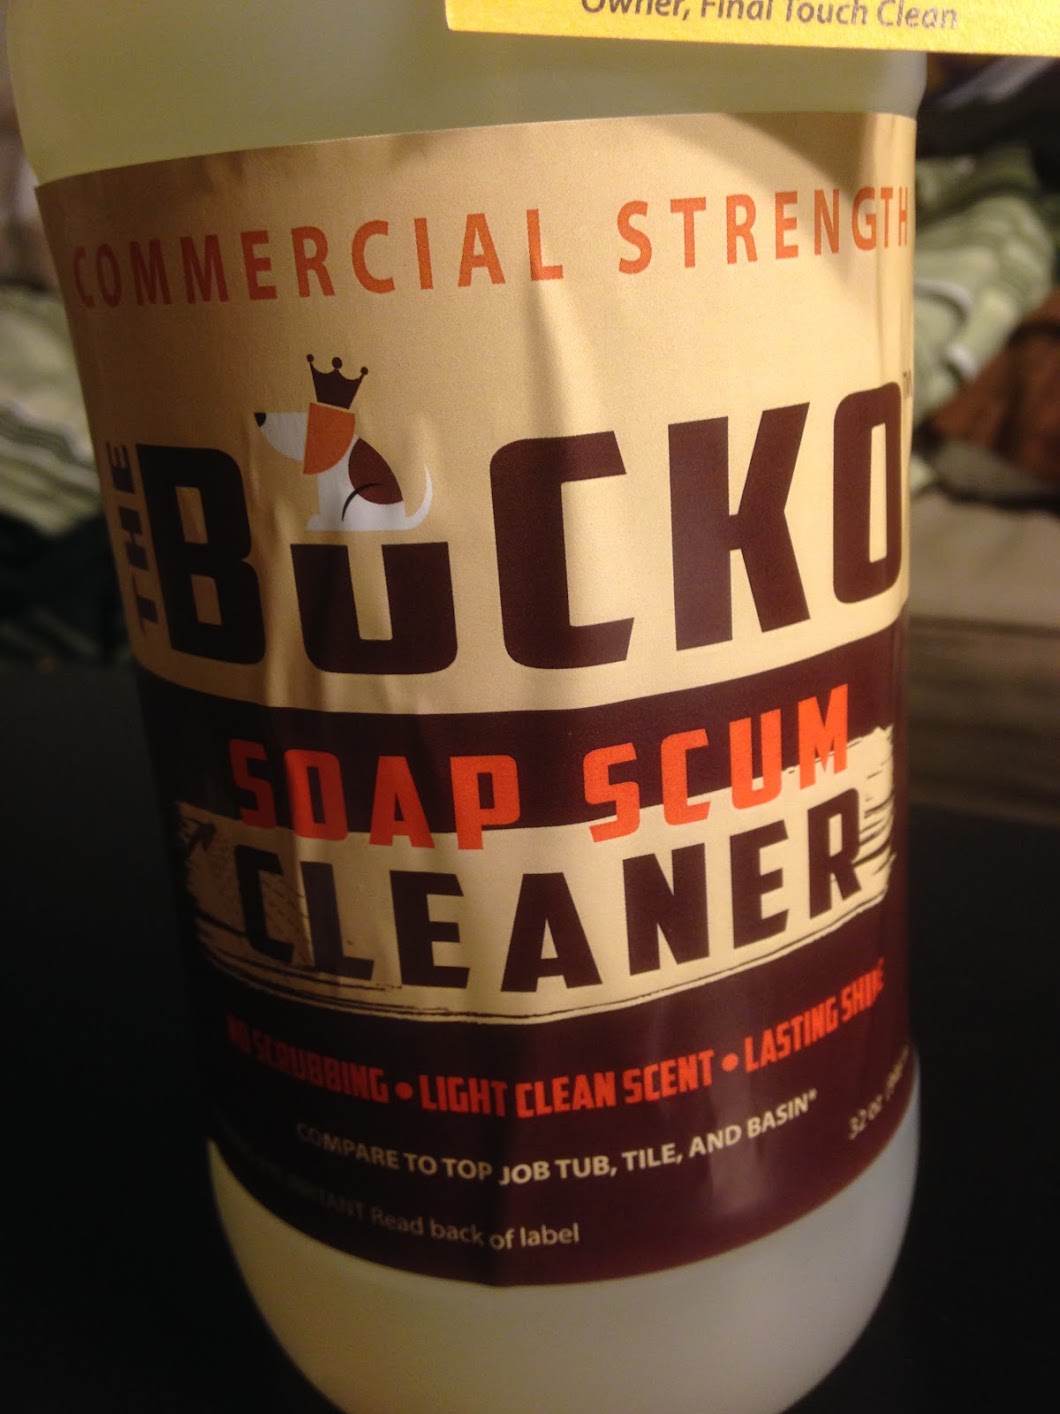 We read The Bucko Soap Scum and Grime Cleaner bad reviews